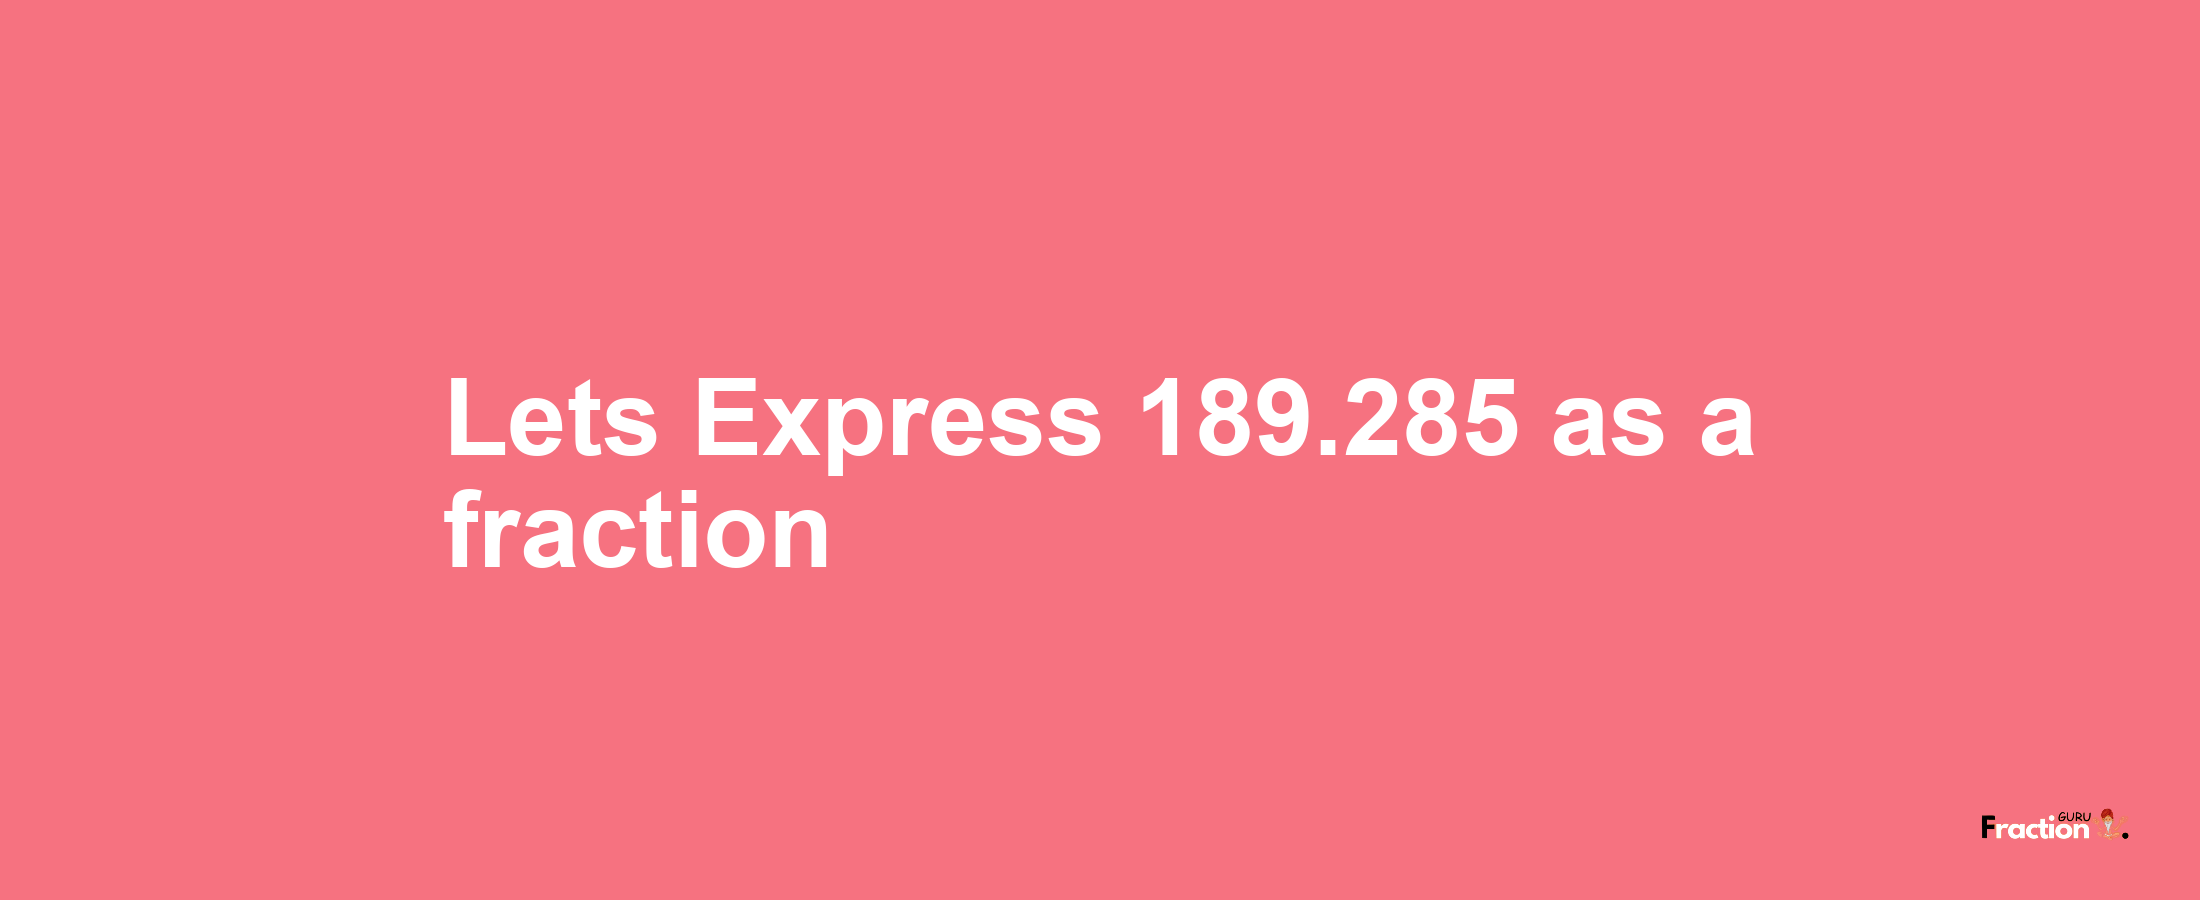 Lets Express 189.285 as afraction